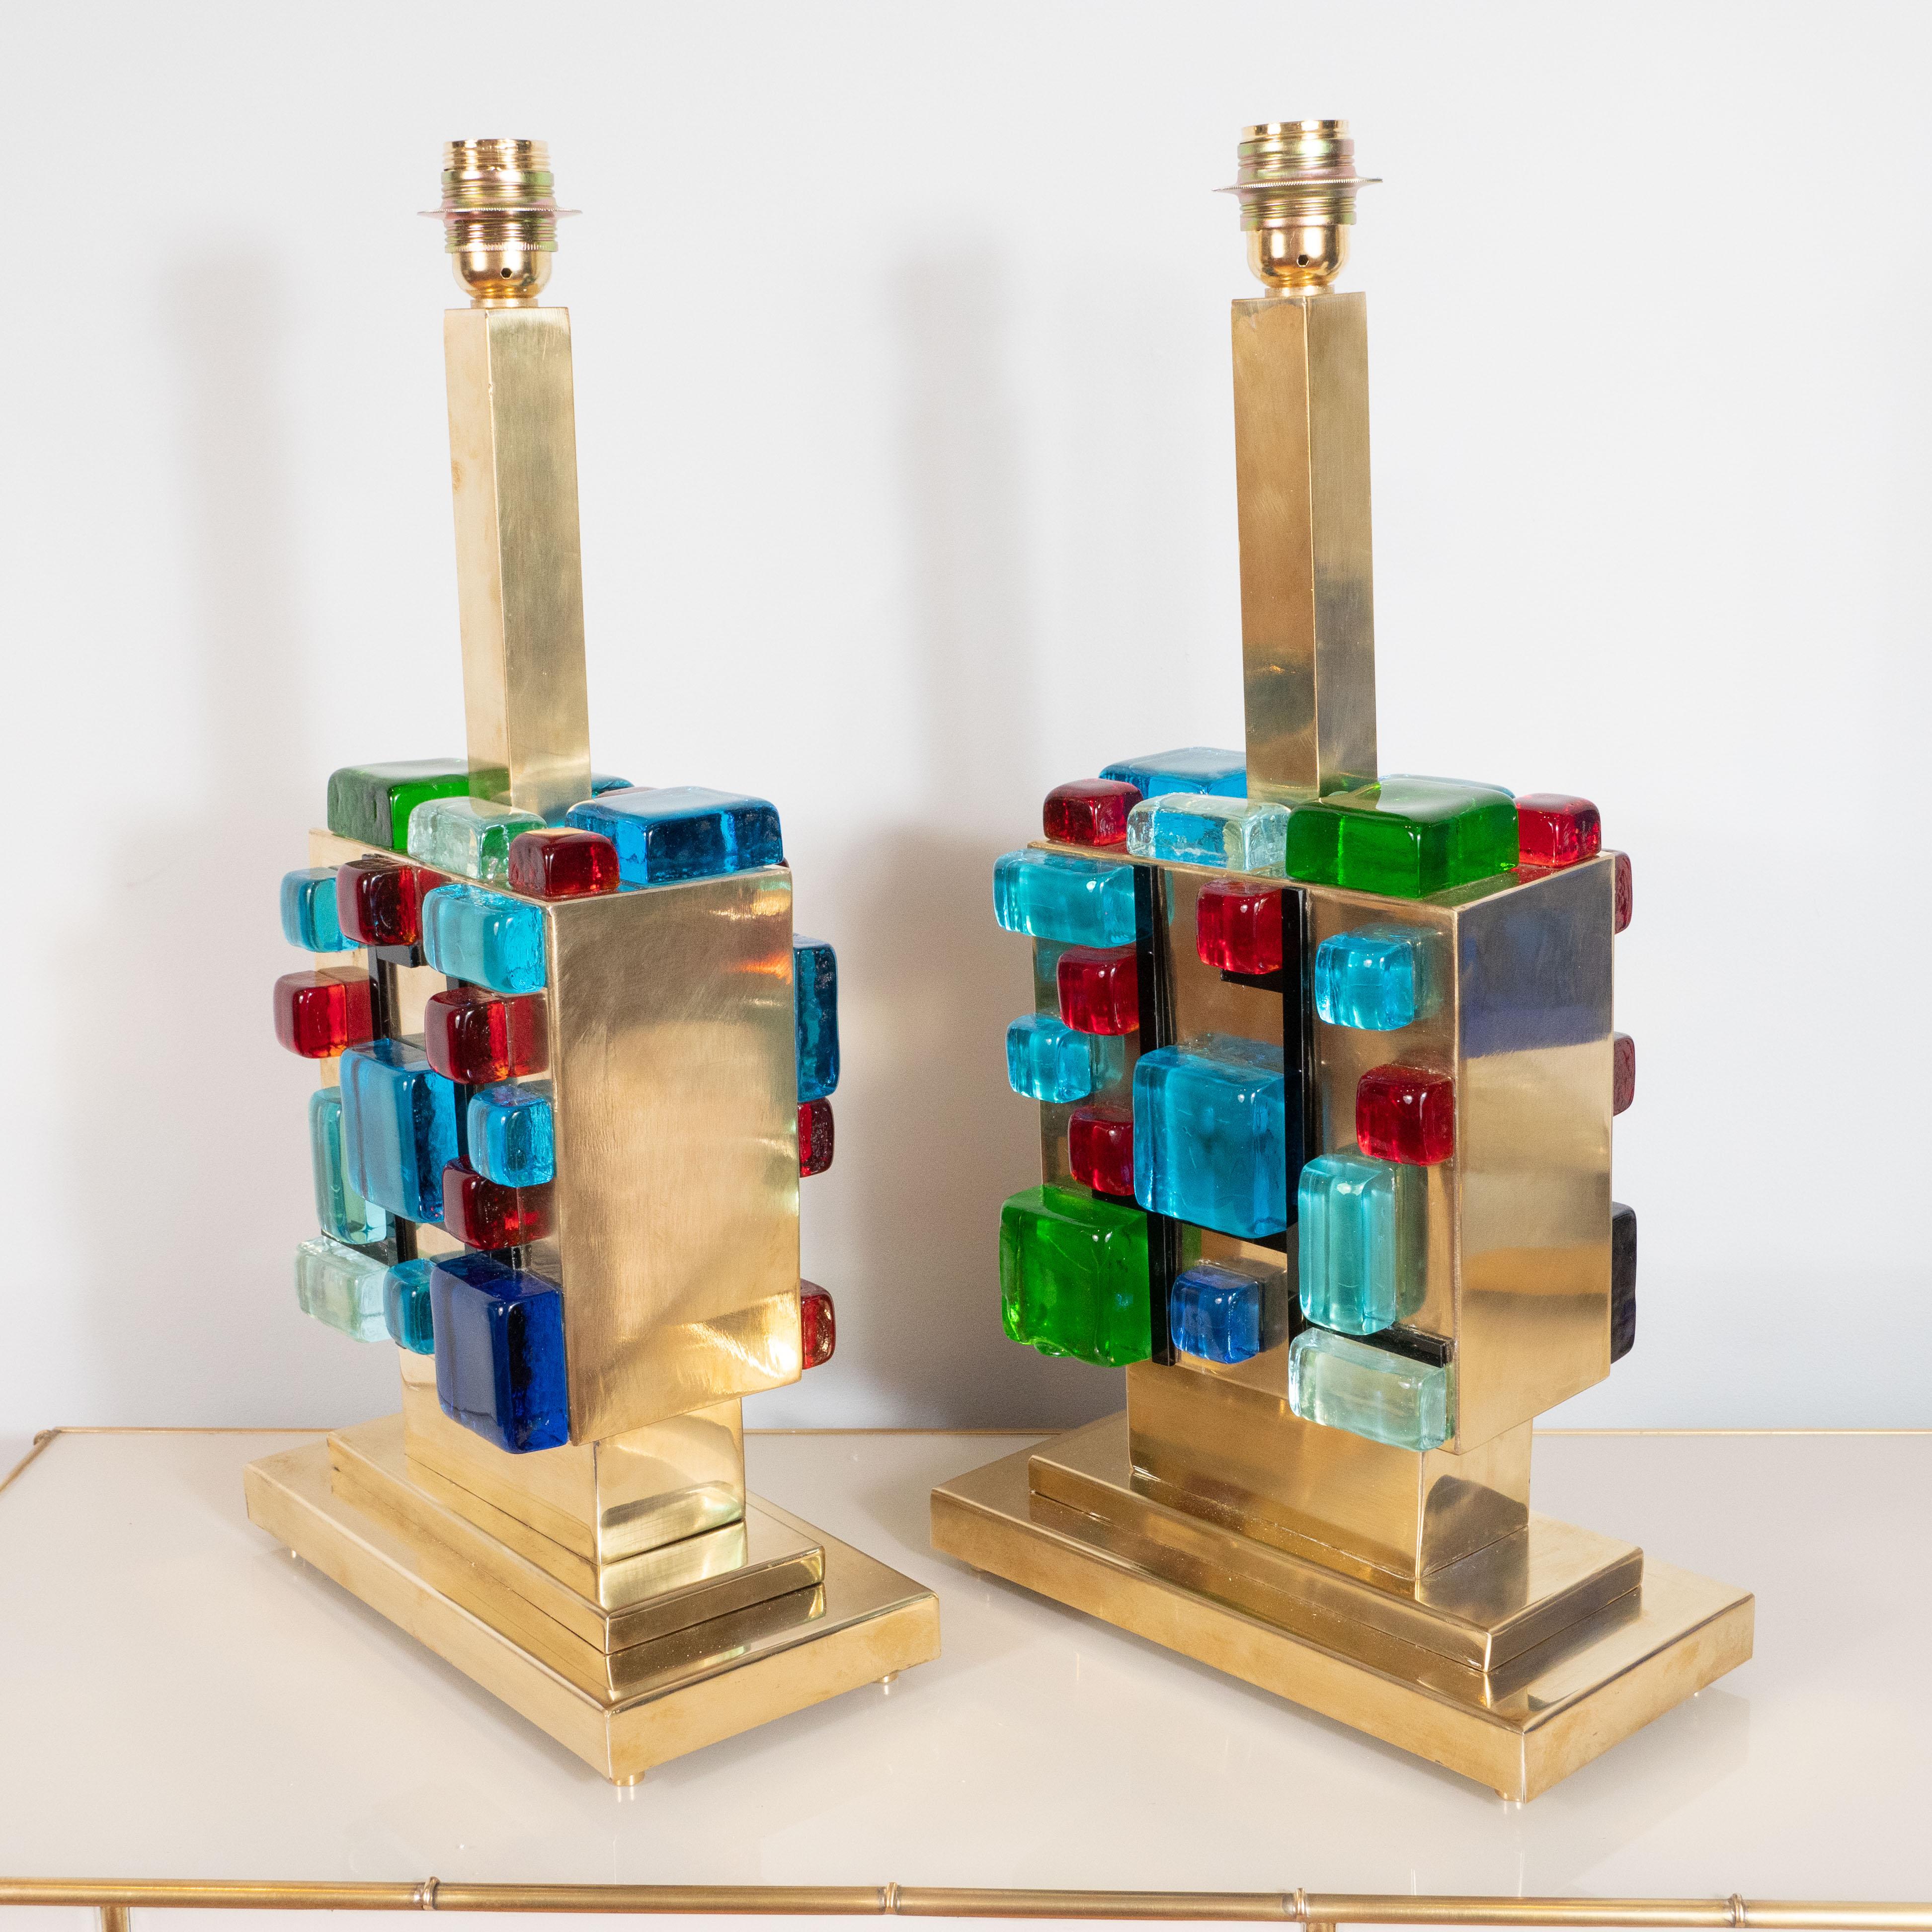 These rare and vibrant pair of lamps consist of multi-colored (red, blue, turquoise, green and clear) Murano glass square blocks arranged in a geometric shape on top of a square polished brass base, allowing the brass to show through. A unique and